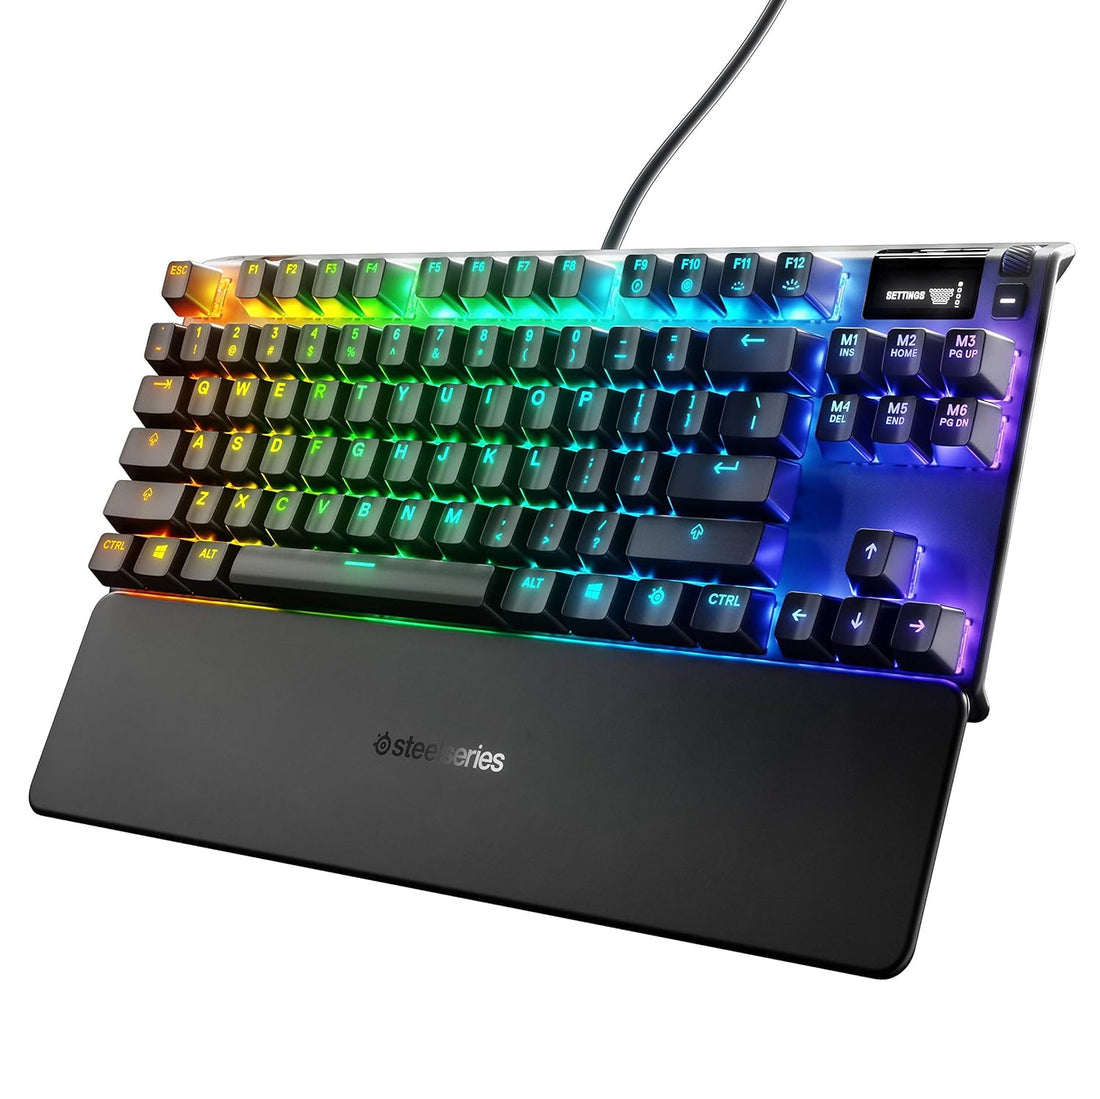 SteelSeries Store Apex 7 TKL Compact Mechanical Gaming Keyboard - OLED Smart Display - USB Passthrough and Media Controls - Linear and Quiet - RGB Backlit (Red Switch)